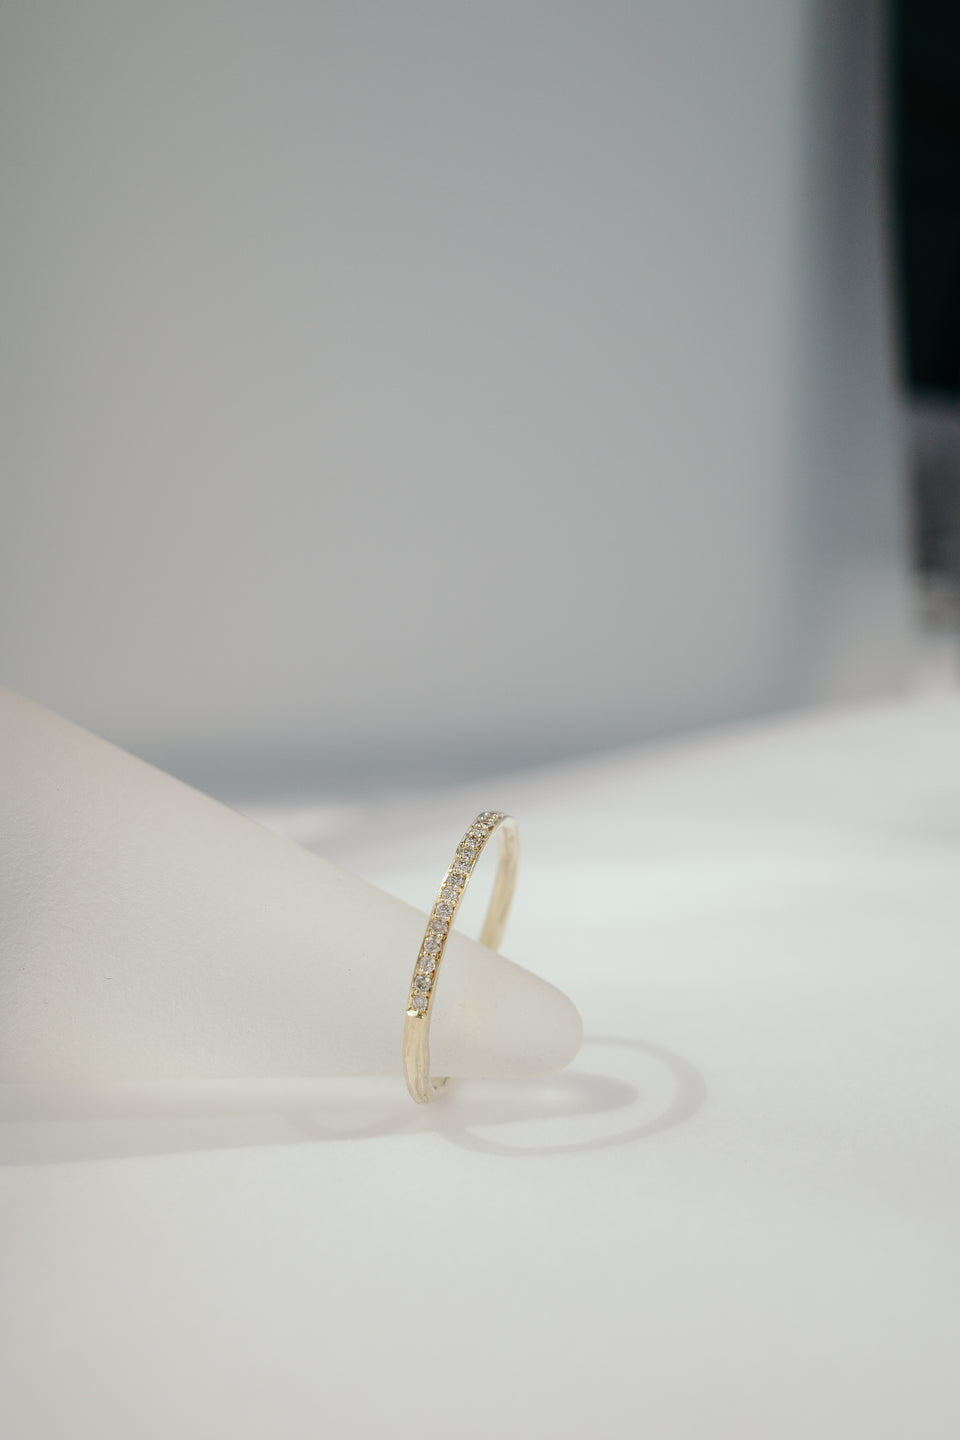 Pavé Ring in Fairmined Gold with Champagne Diamonds